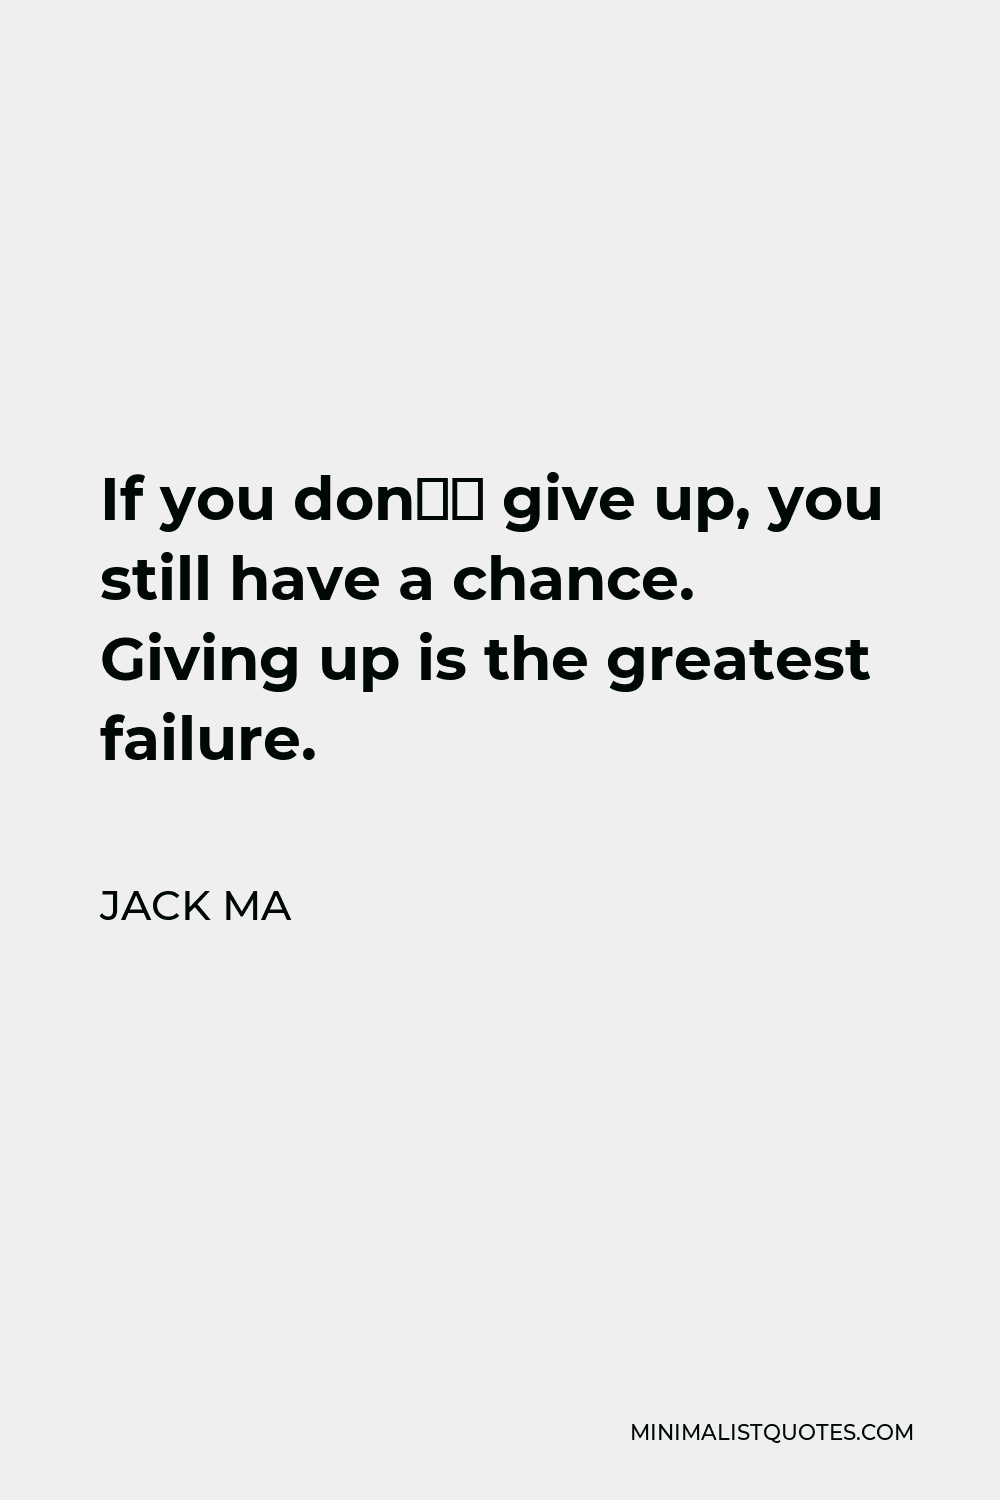 Jack Ma Quote - If you don’t give up, you still have a chance. And when you are small, you have to be very focused and rely on your brain, not your strength.